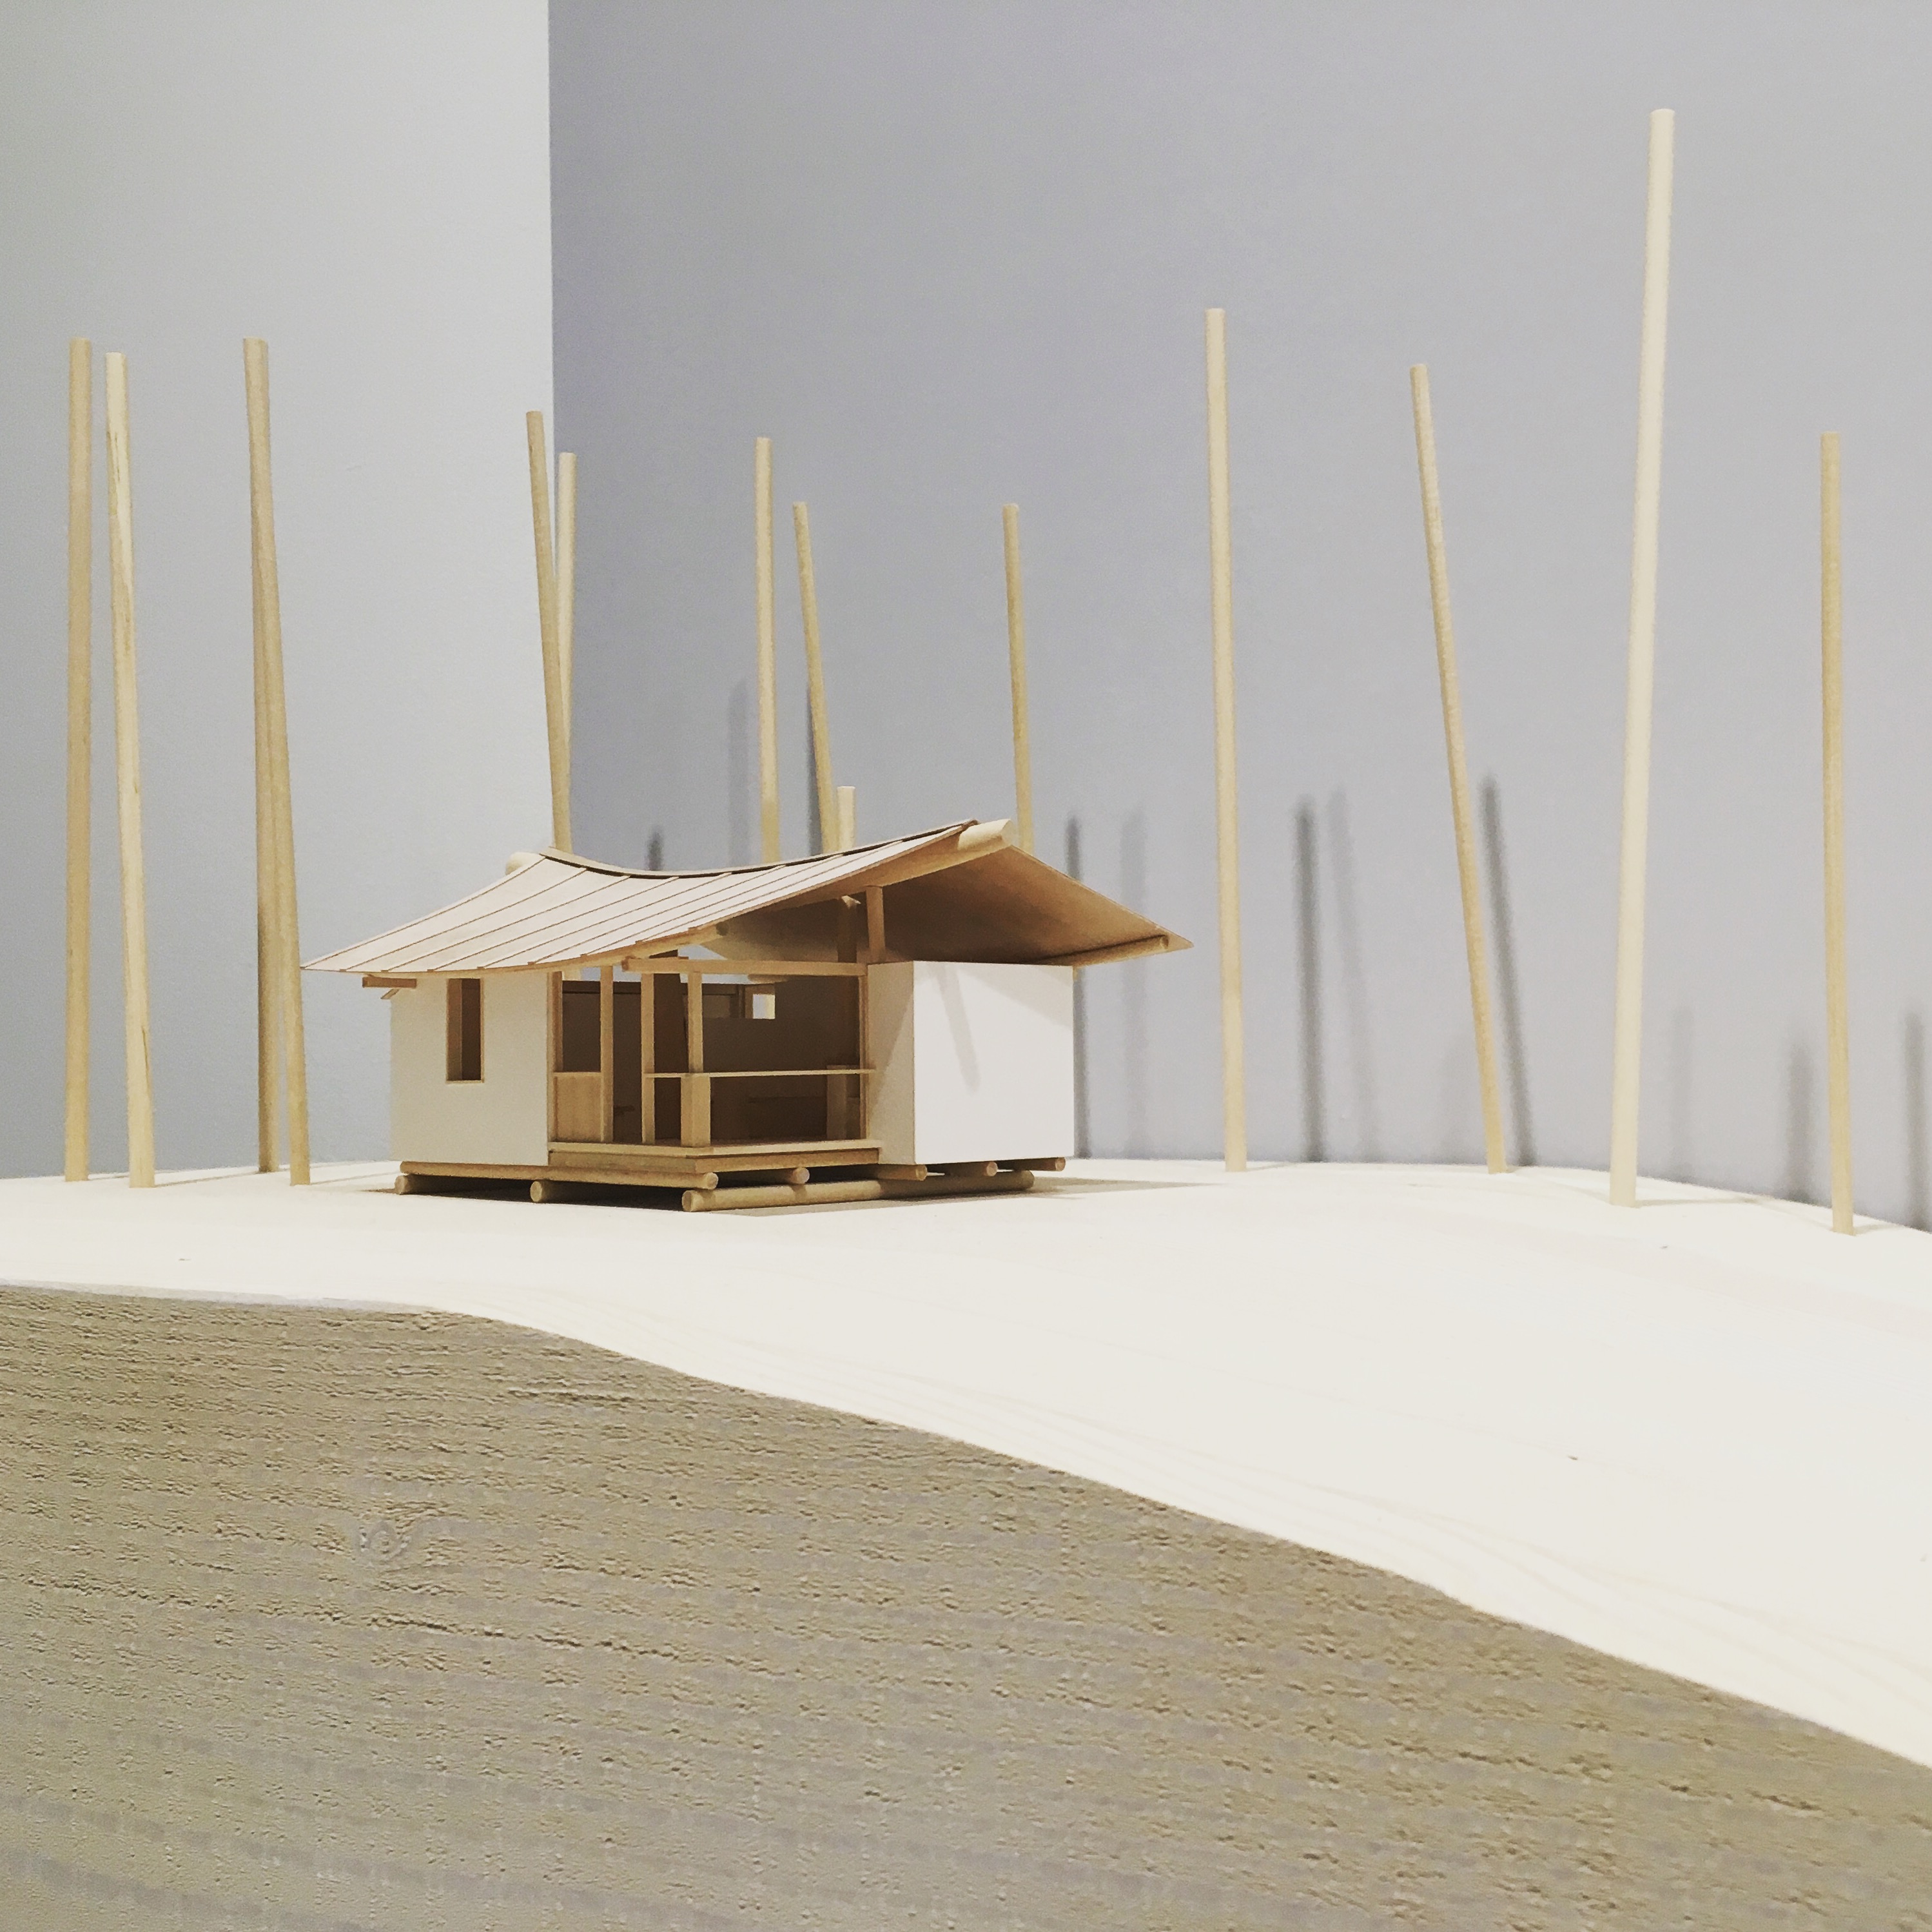 Model of Leaf House. Exhibit at the Vancouver Art Gallery. June 9, 2018. 